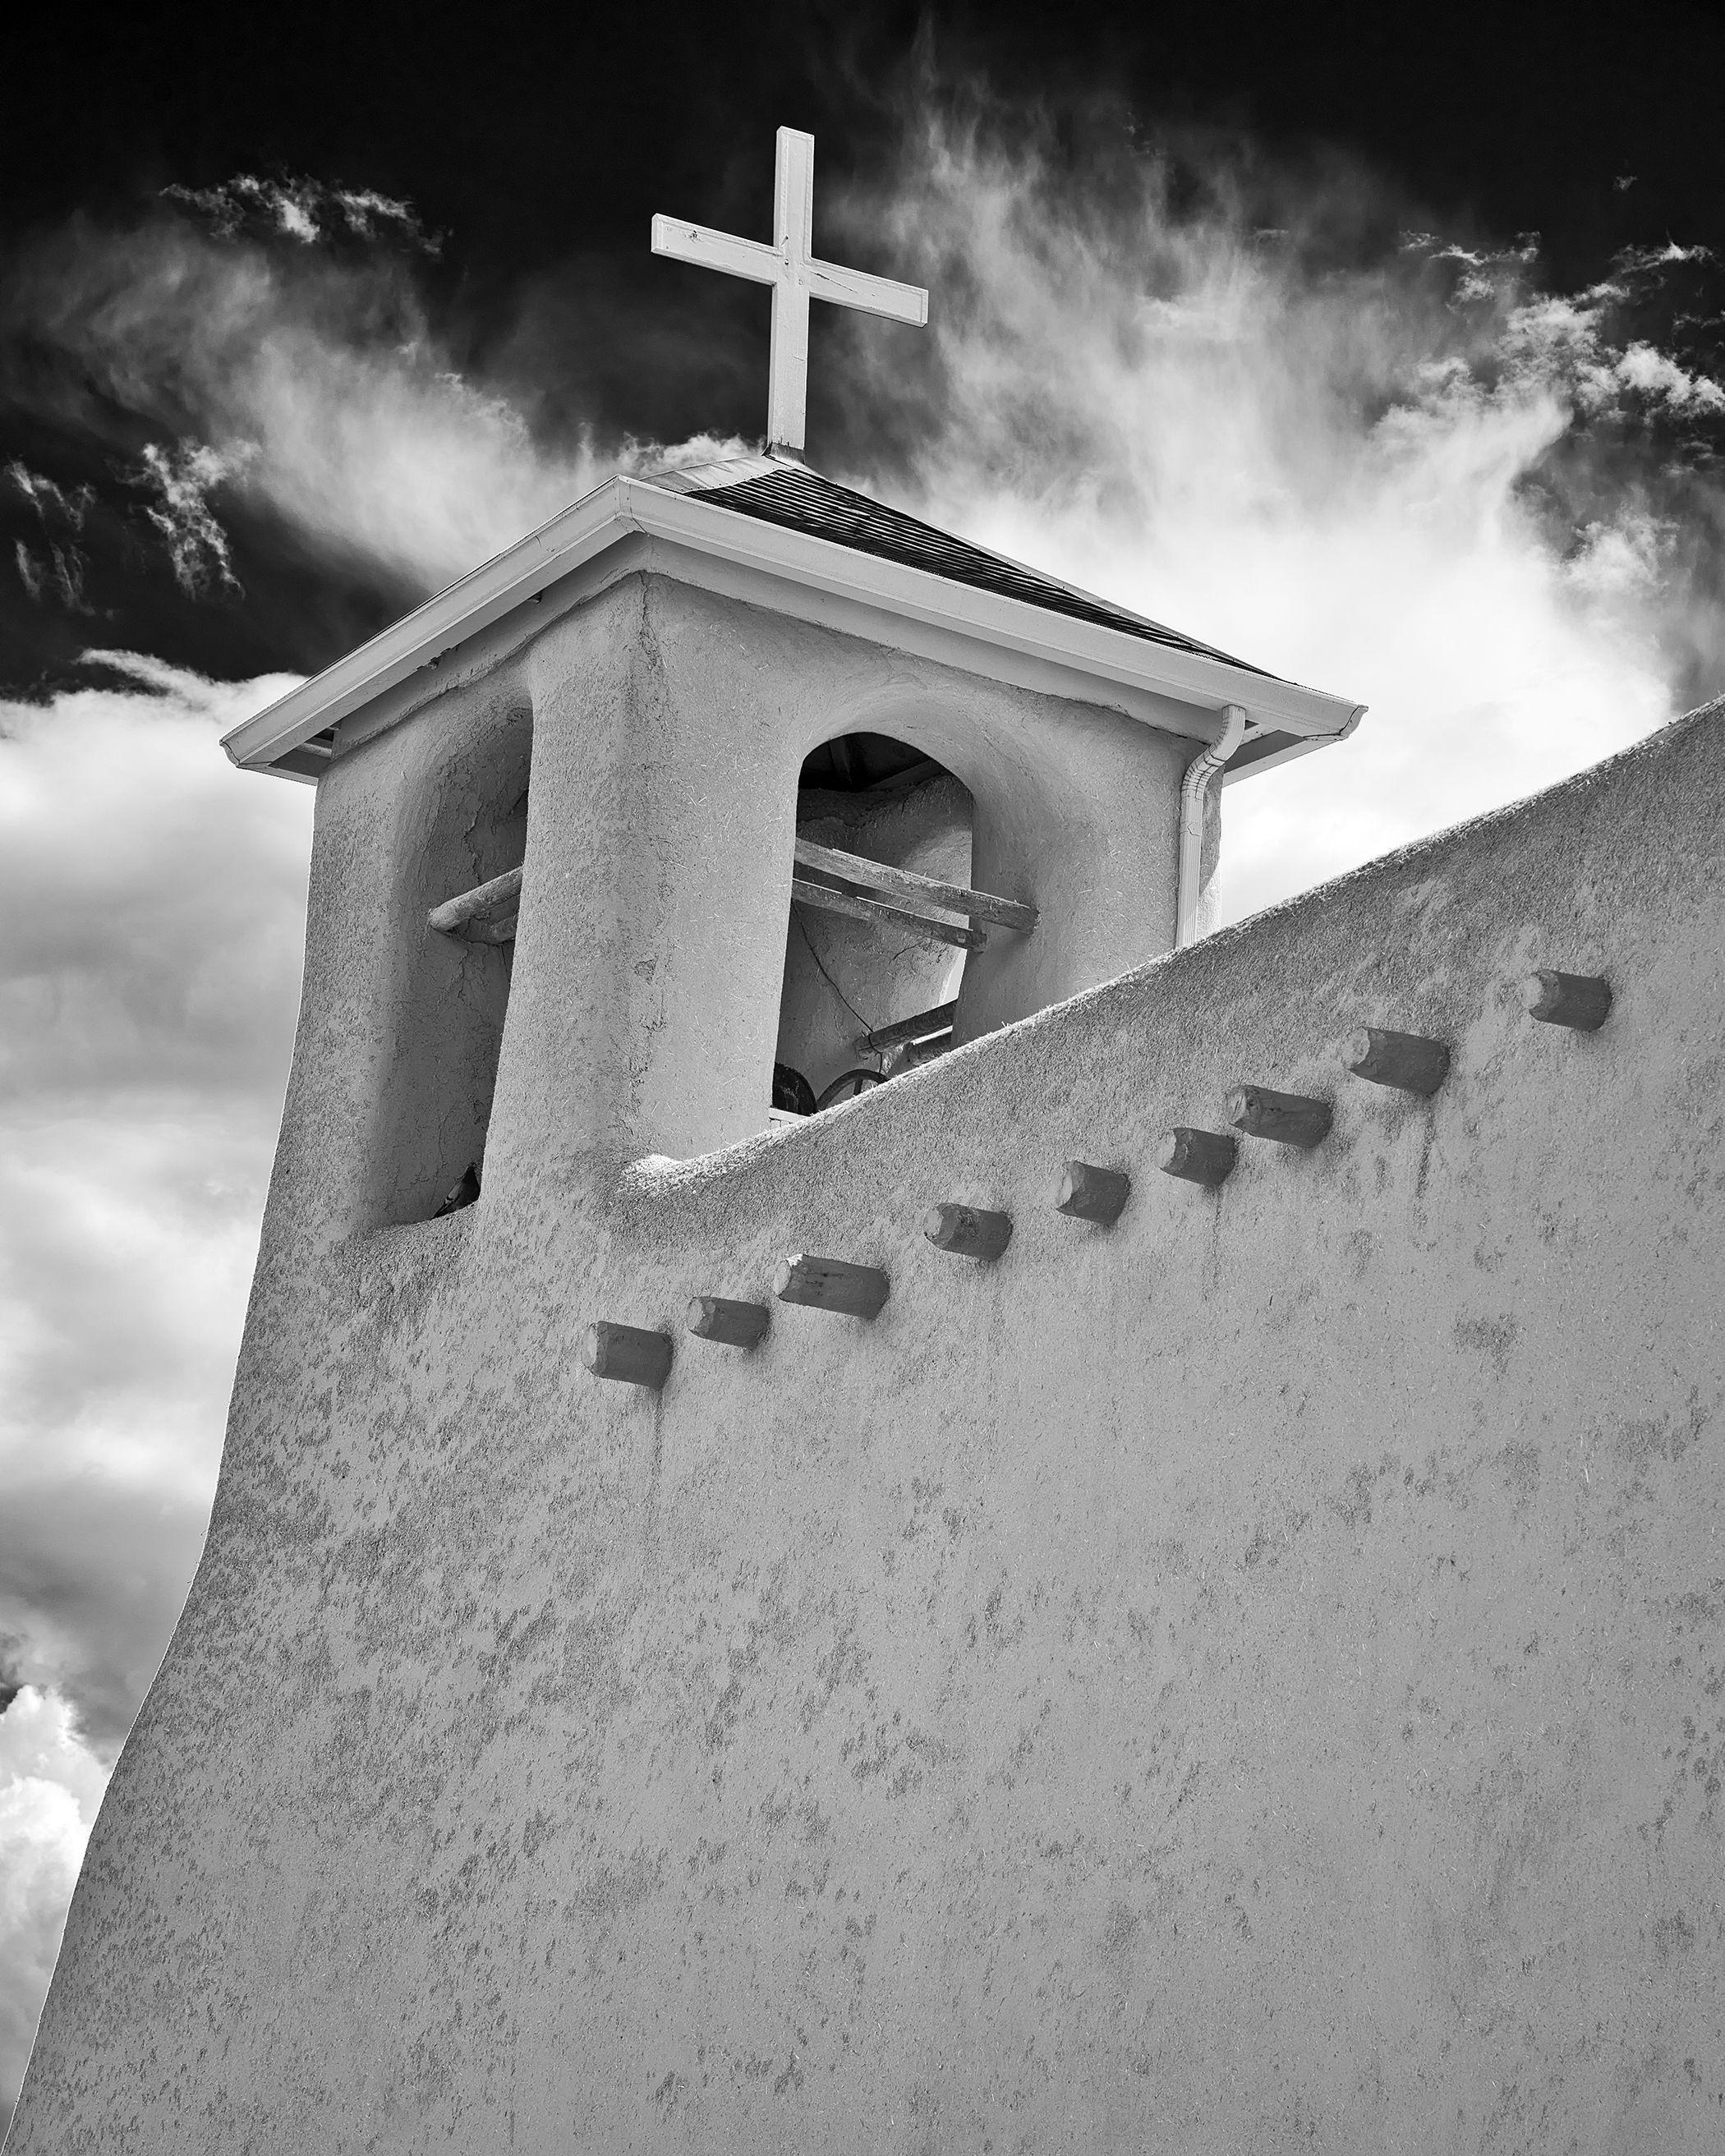 Daniel Ashe Black and White Photograph - Bell Tower - ACRYLIC/METAL PRINT WALL ART, Photograph, C-Type